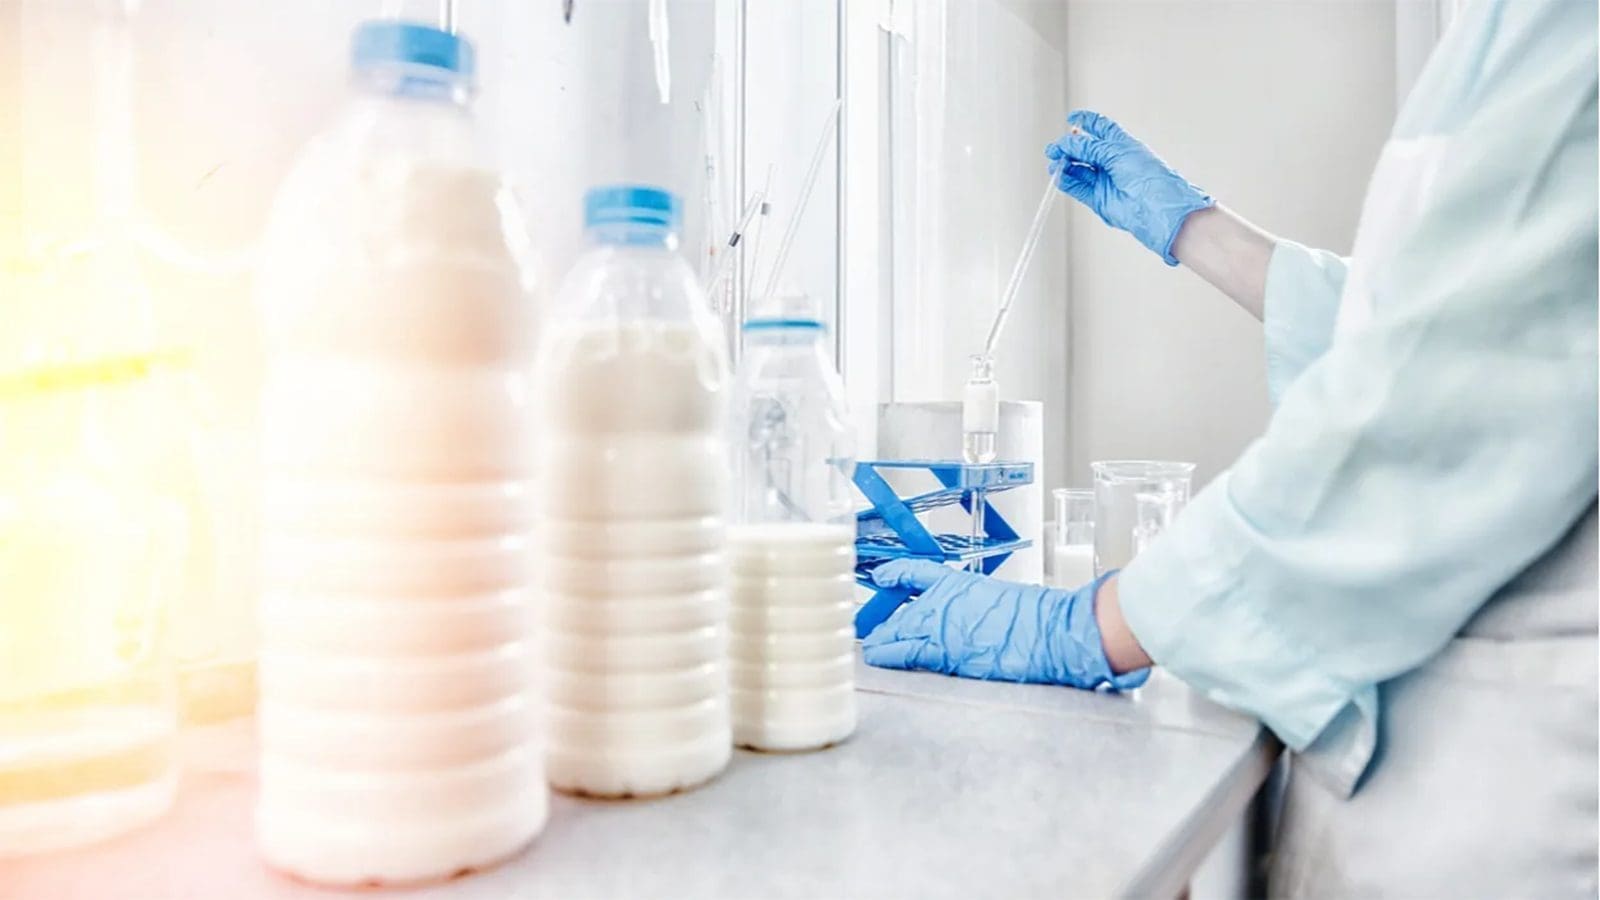 Researchers invent technology to zap out Staphylococcus in milk